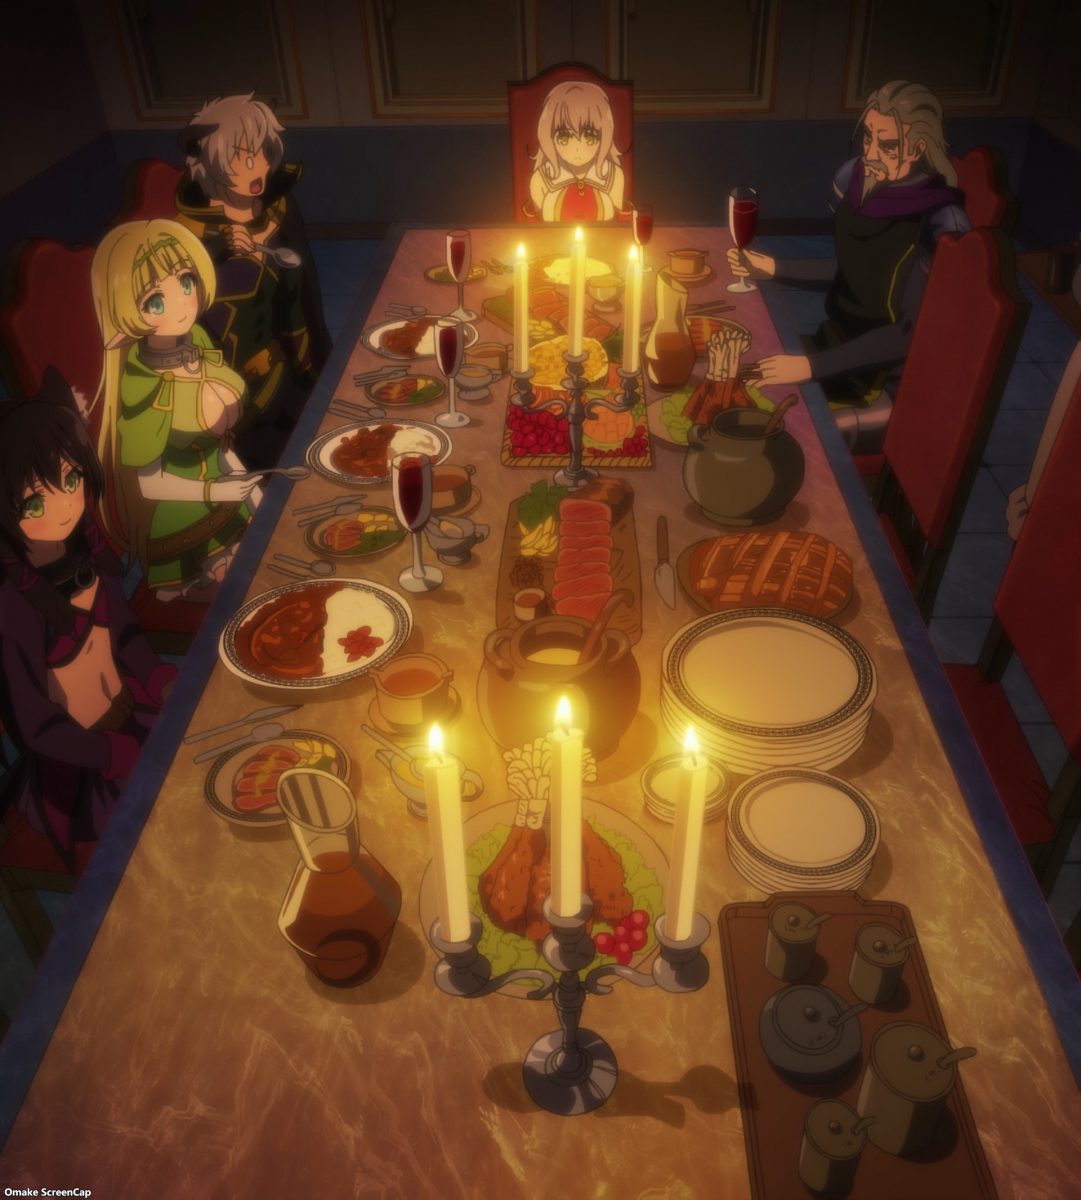 Isekai Maou S2 Episode 2 Banquet For Lumachina And Guests